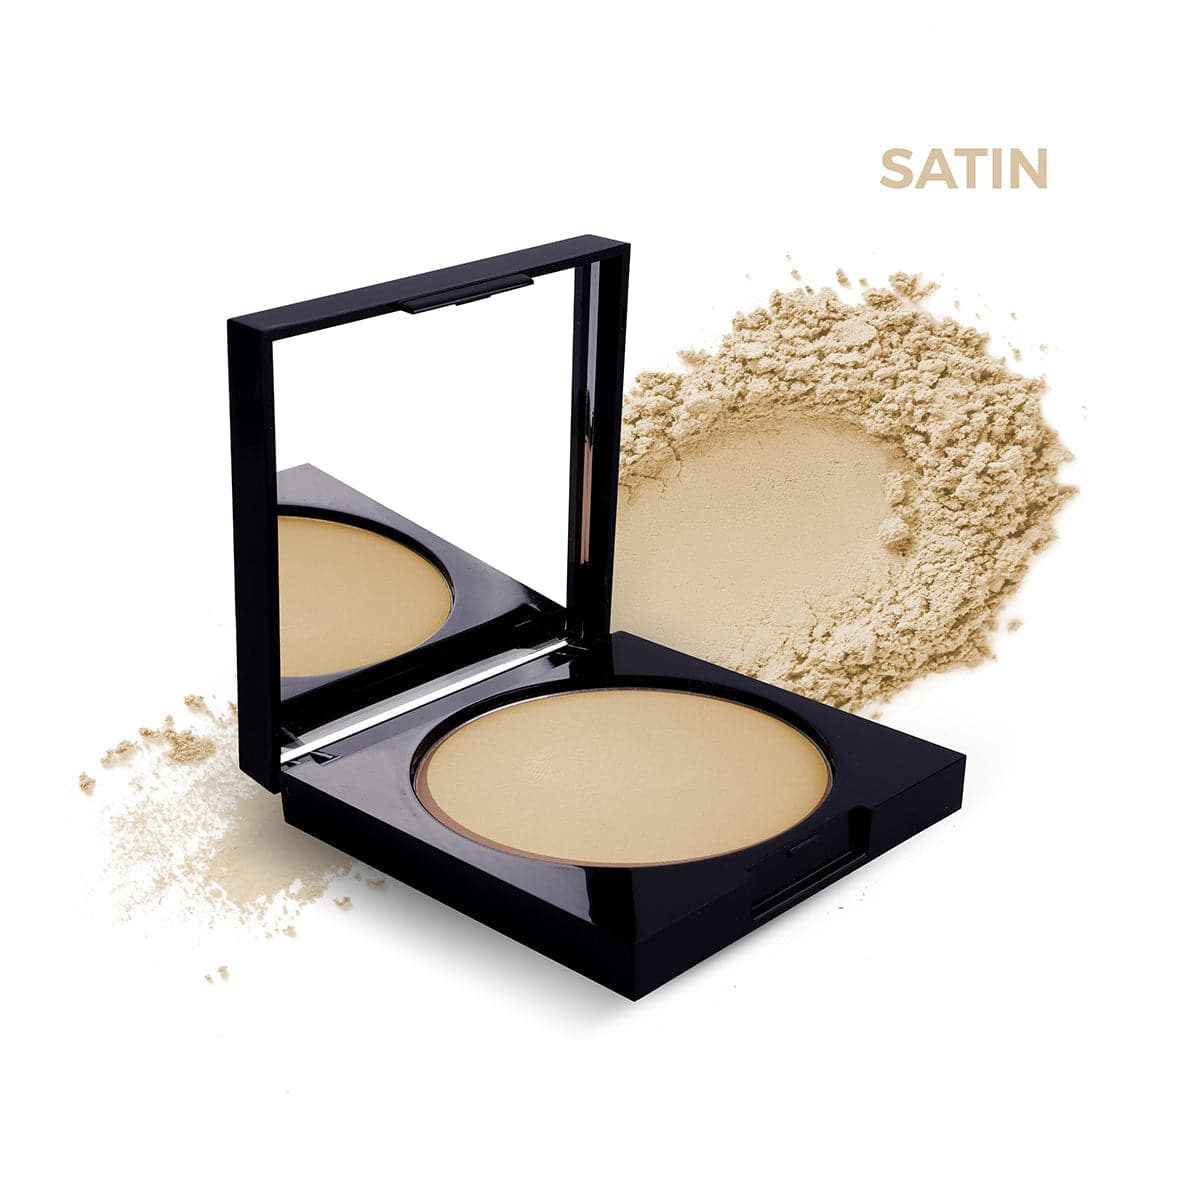 ST London Mineralz Compact Powder - Satin 1 - Premium Health & Beauty from St London - Just Rs 2450.00! Shop now at Cozmetica